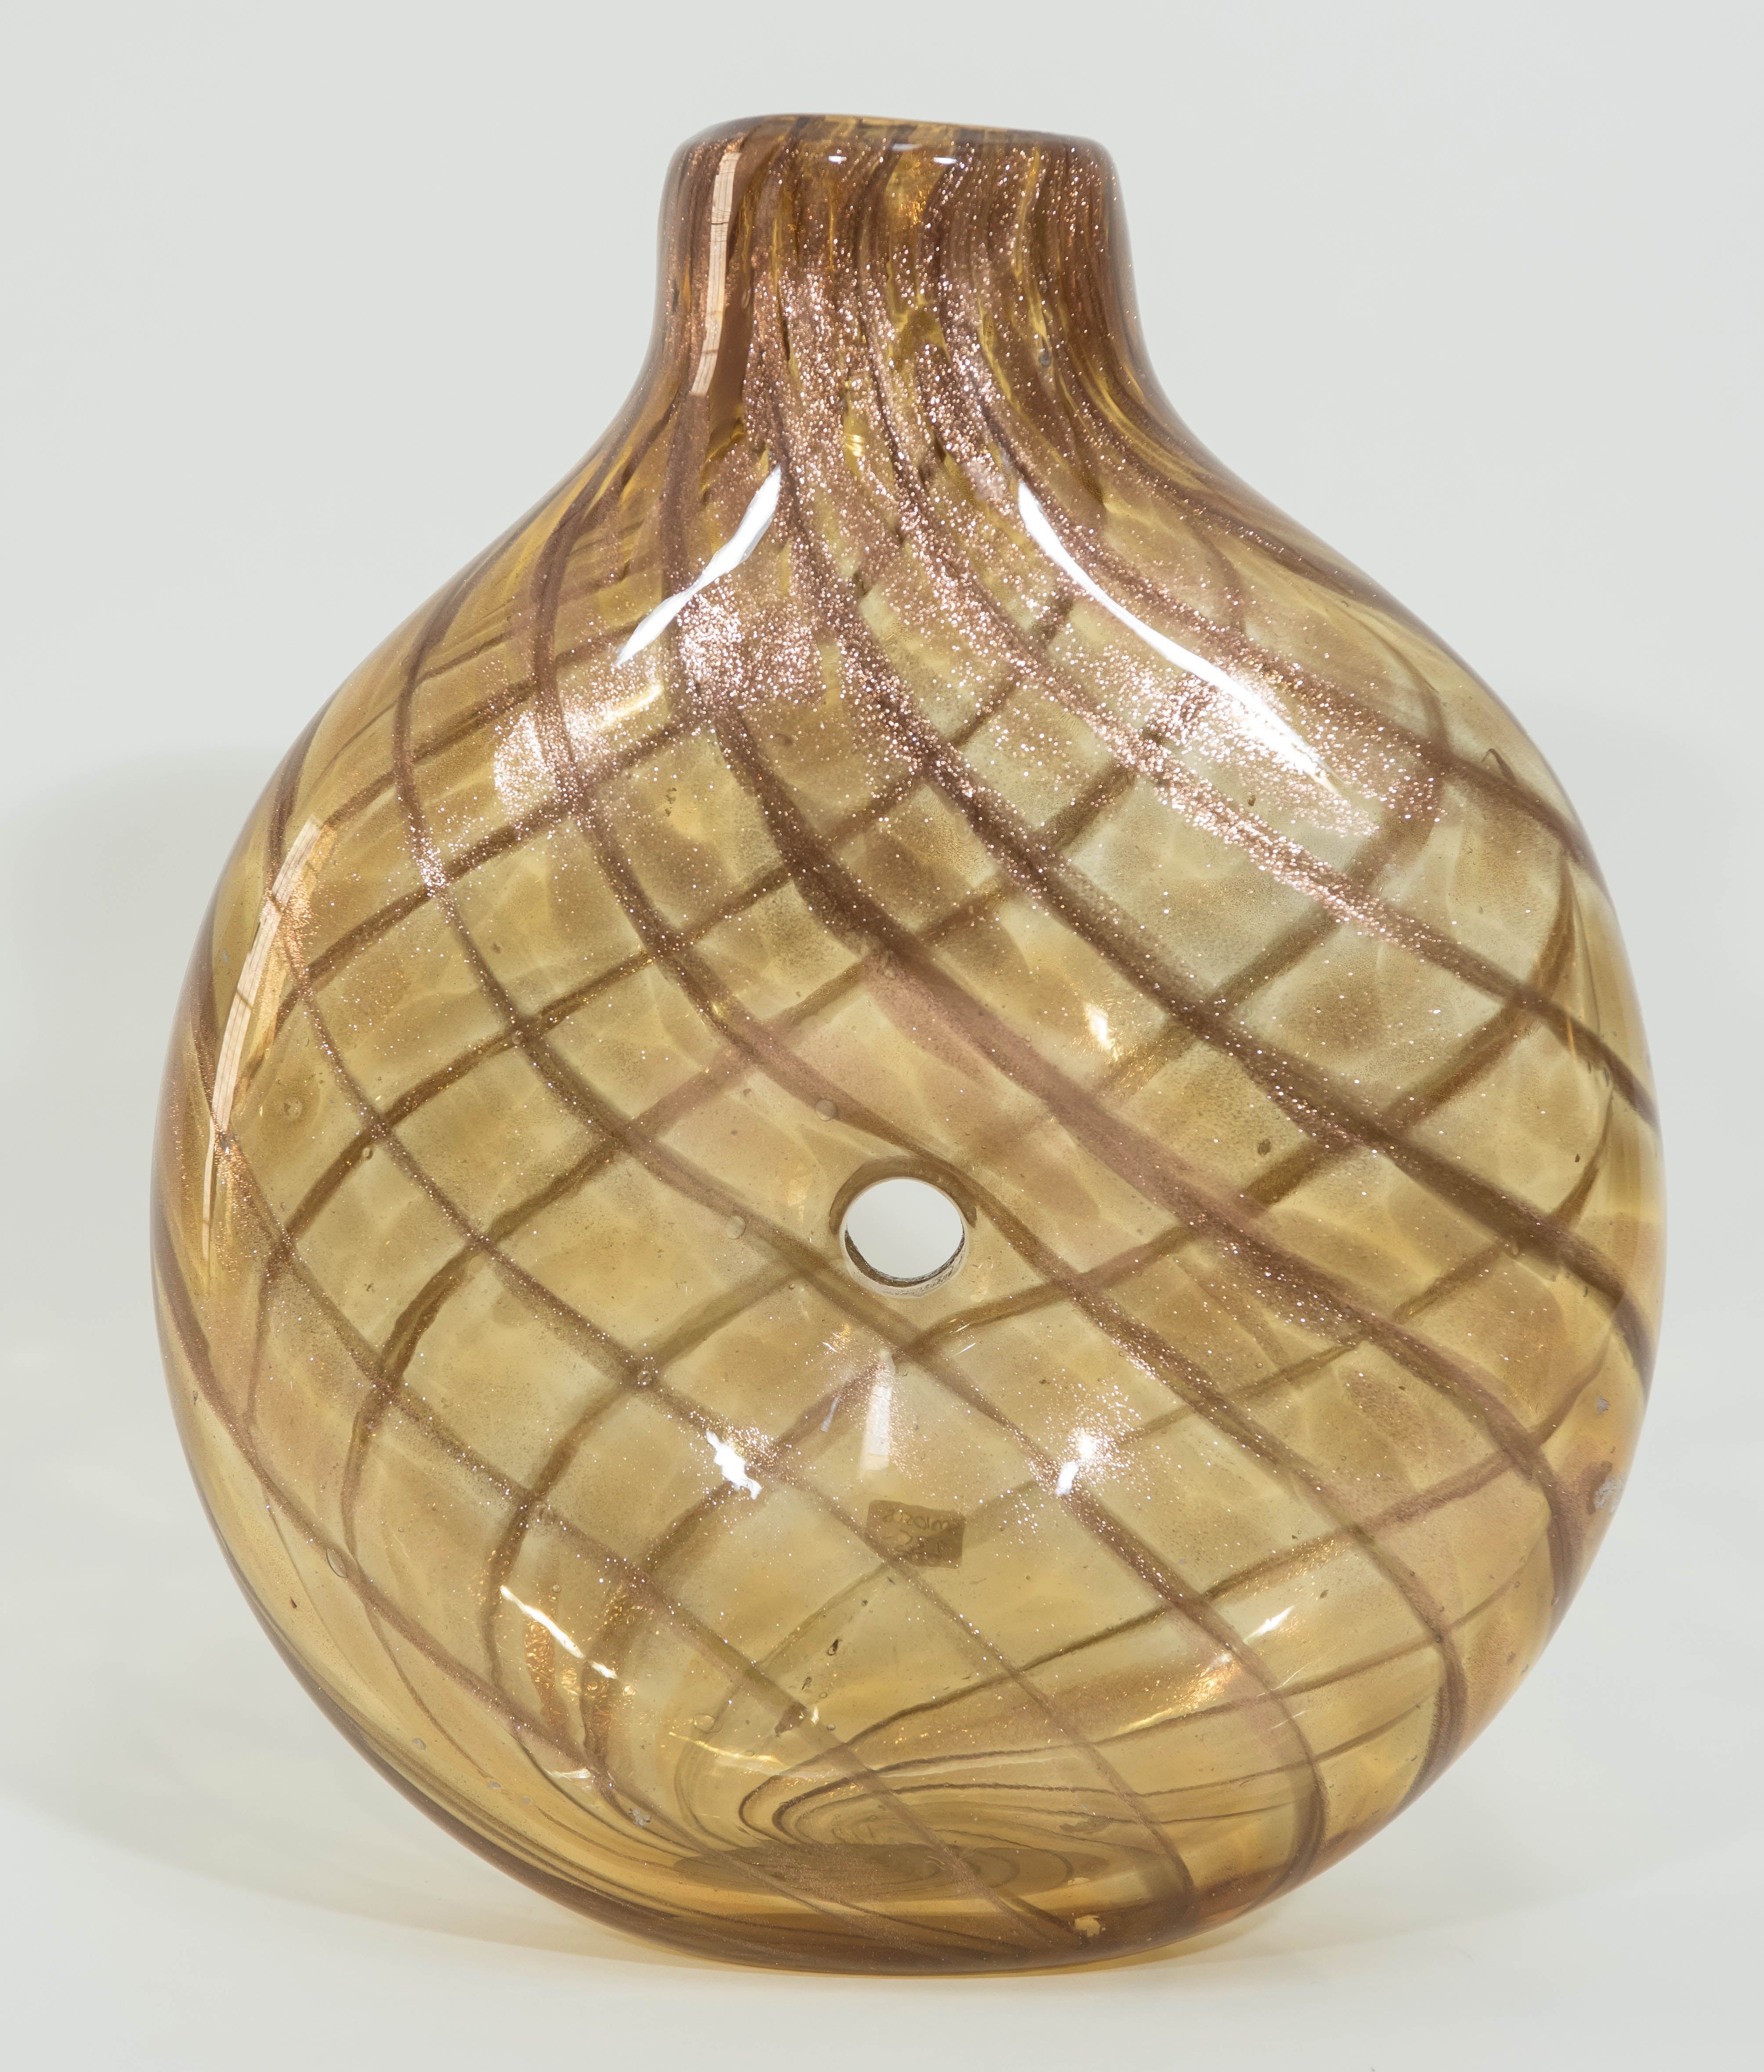 This large and sculptural amber colored Murano vase is infused with an iridescent copper 